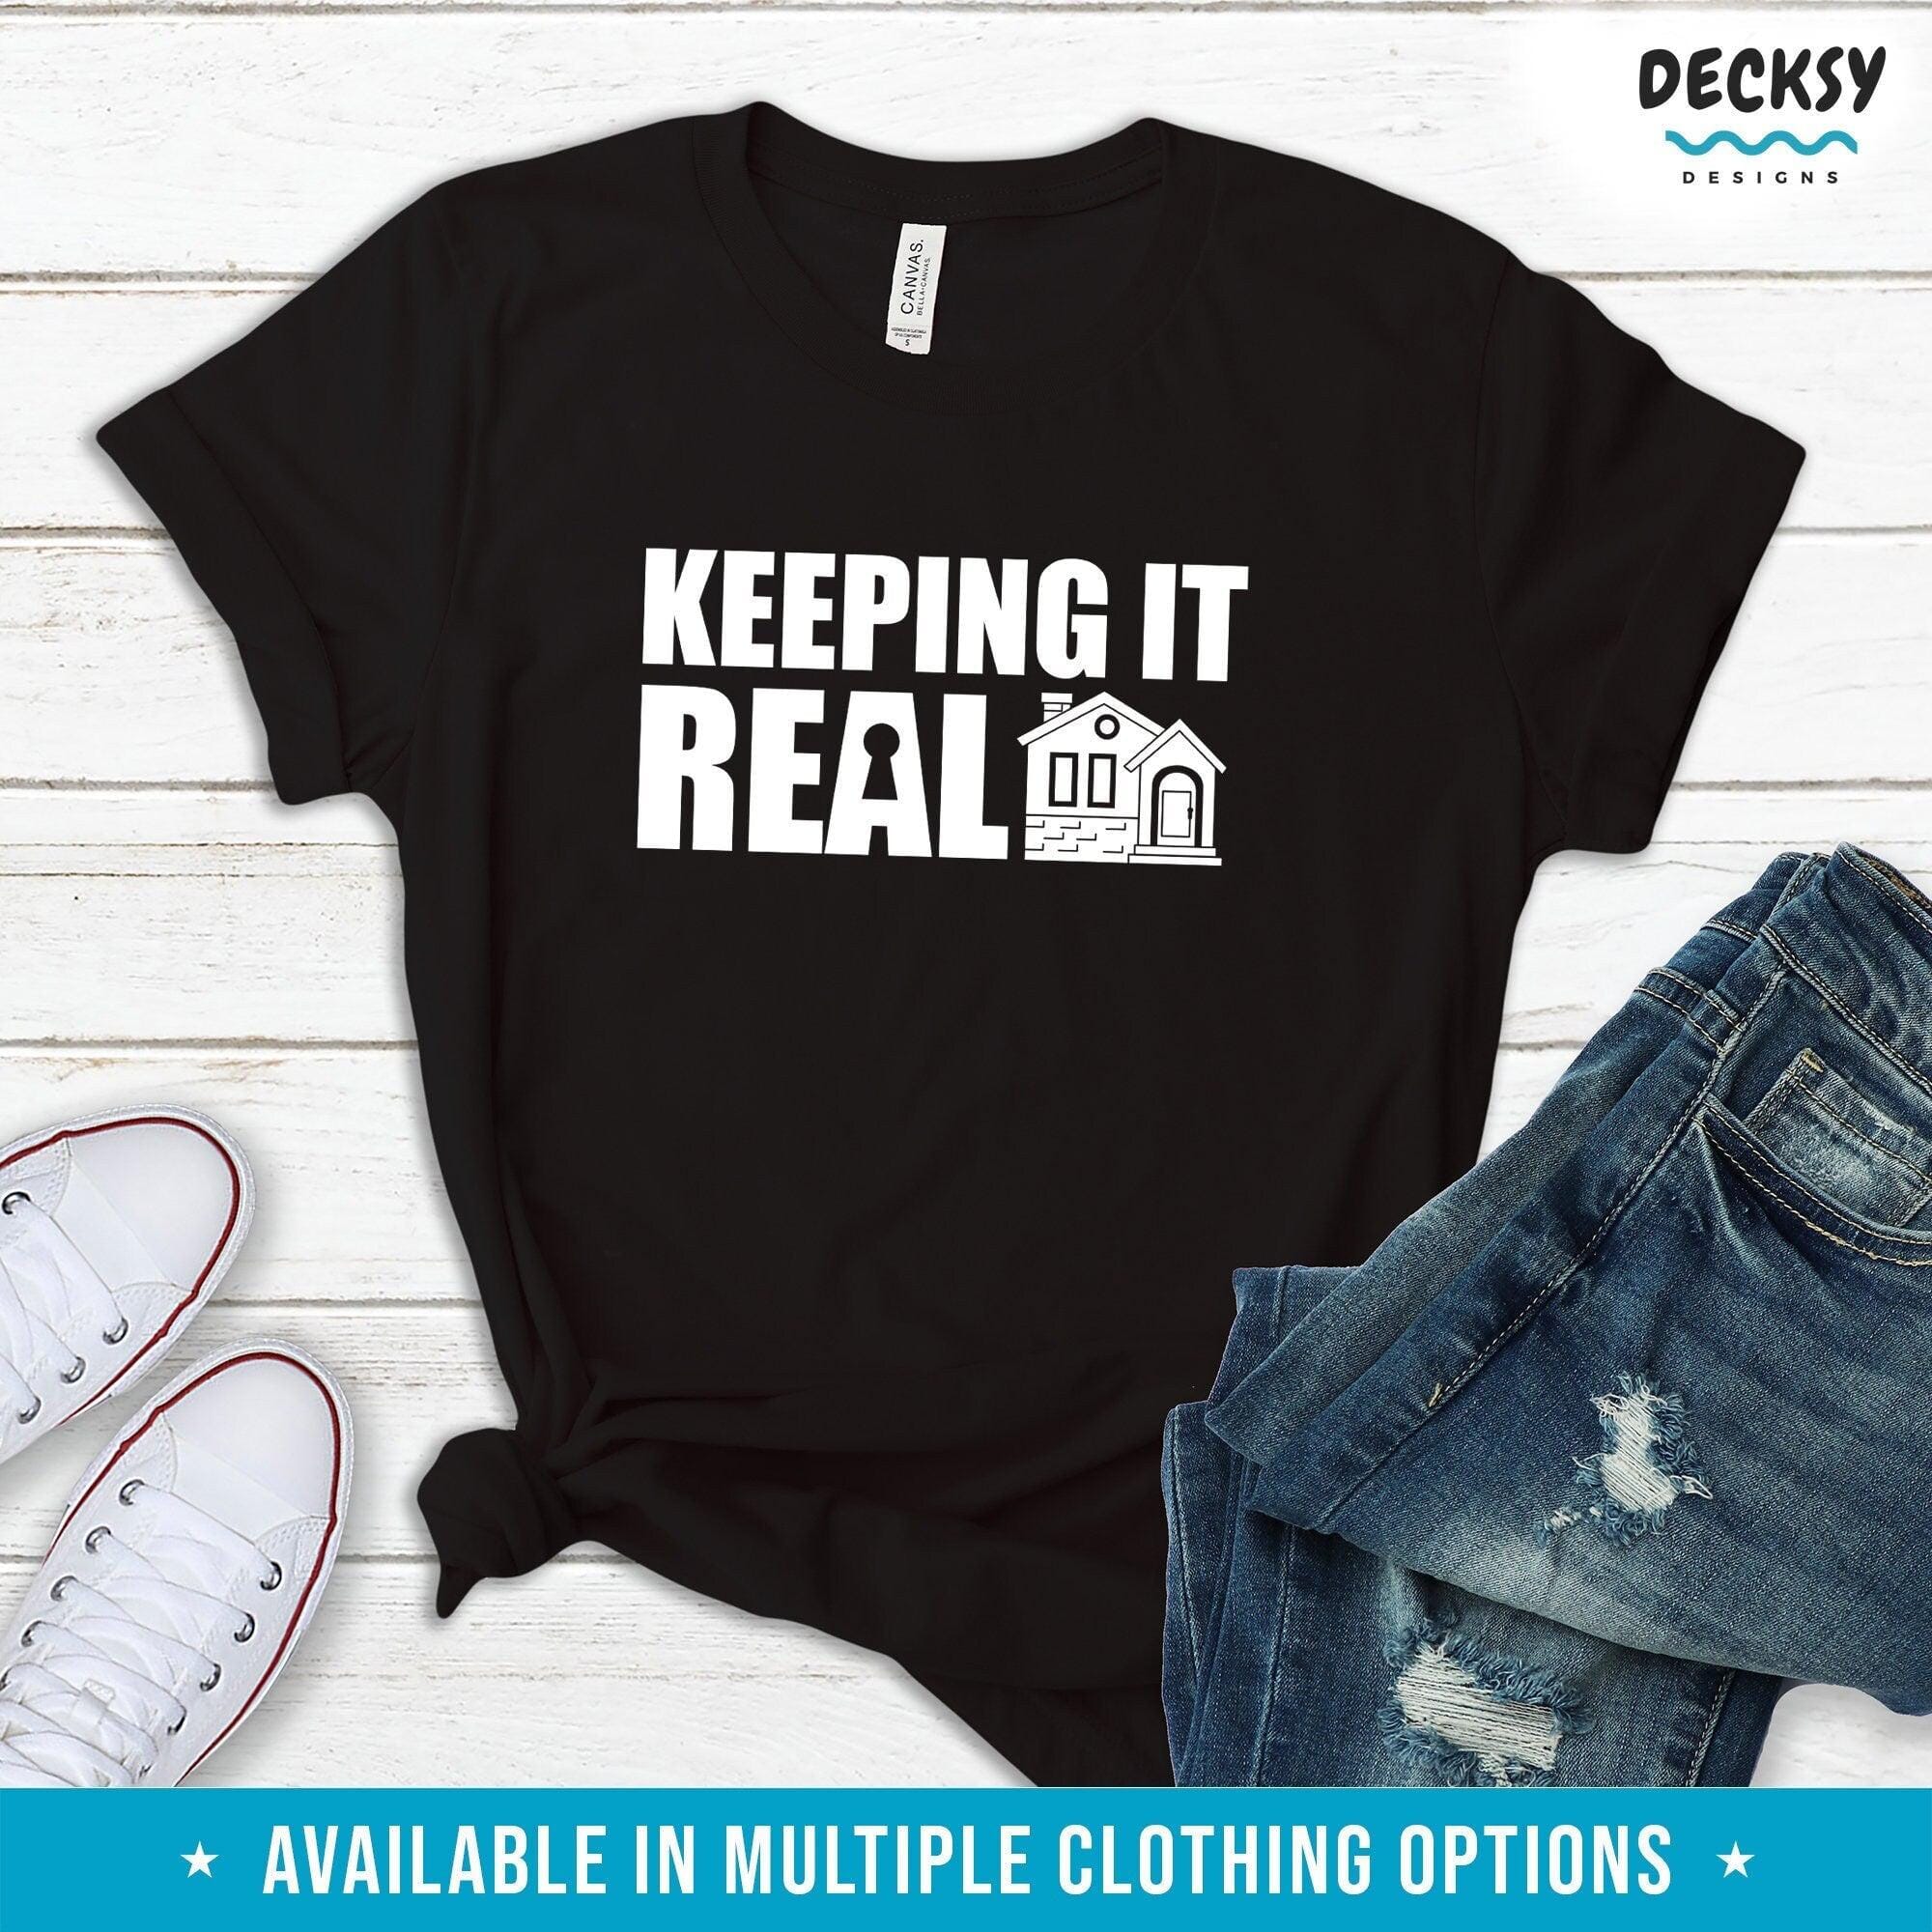 Real Estate Tshirt, Gift For Realtor-Clothing:Gender-Neutral Adult Clothing:Tops & Tees:T-shirts:Graphic Tees-DecksyDesigns